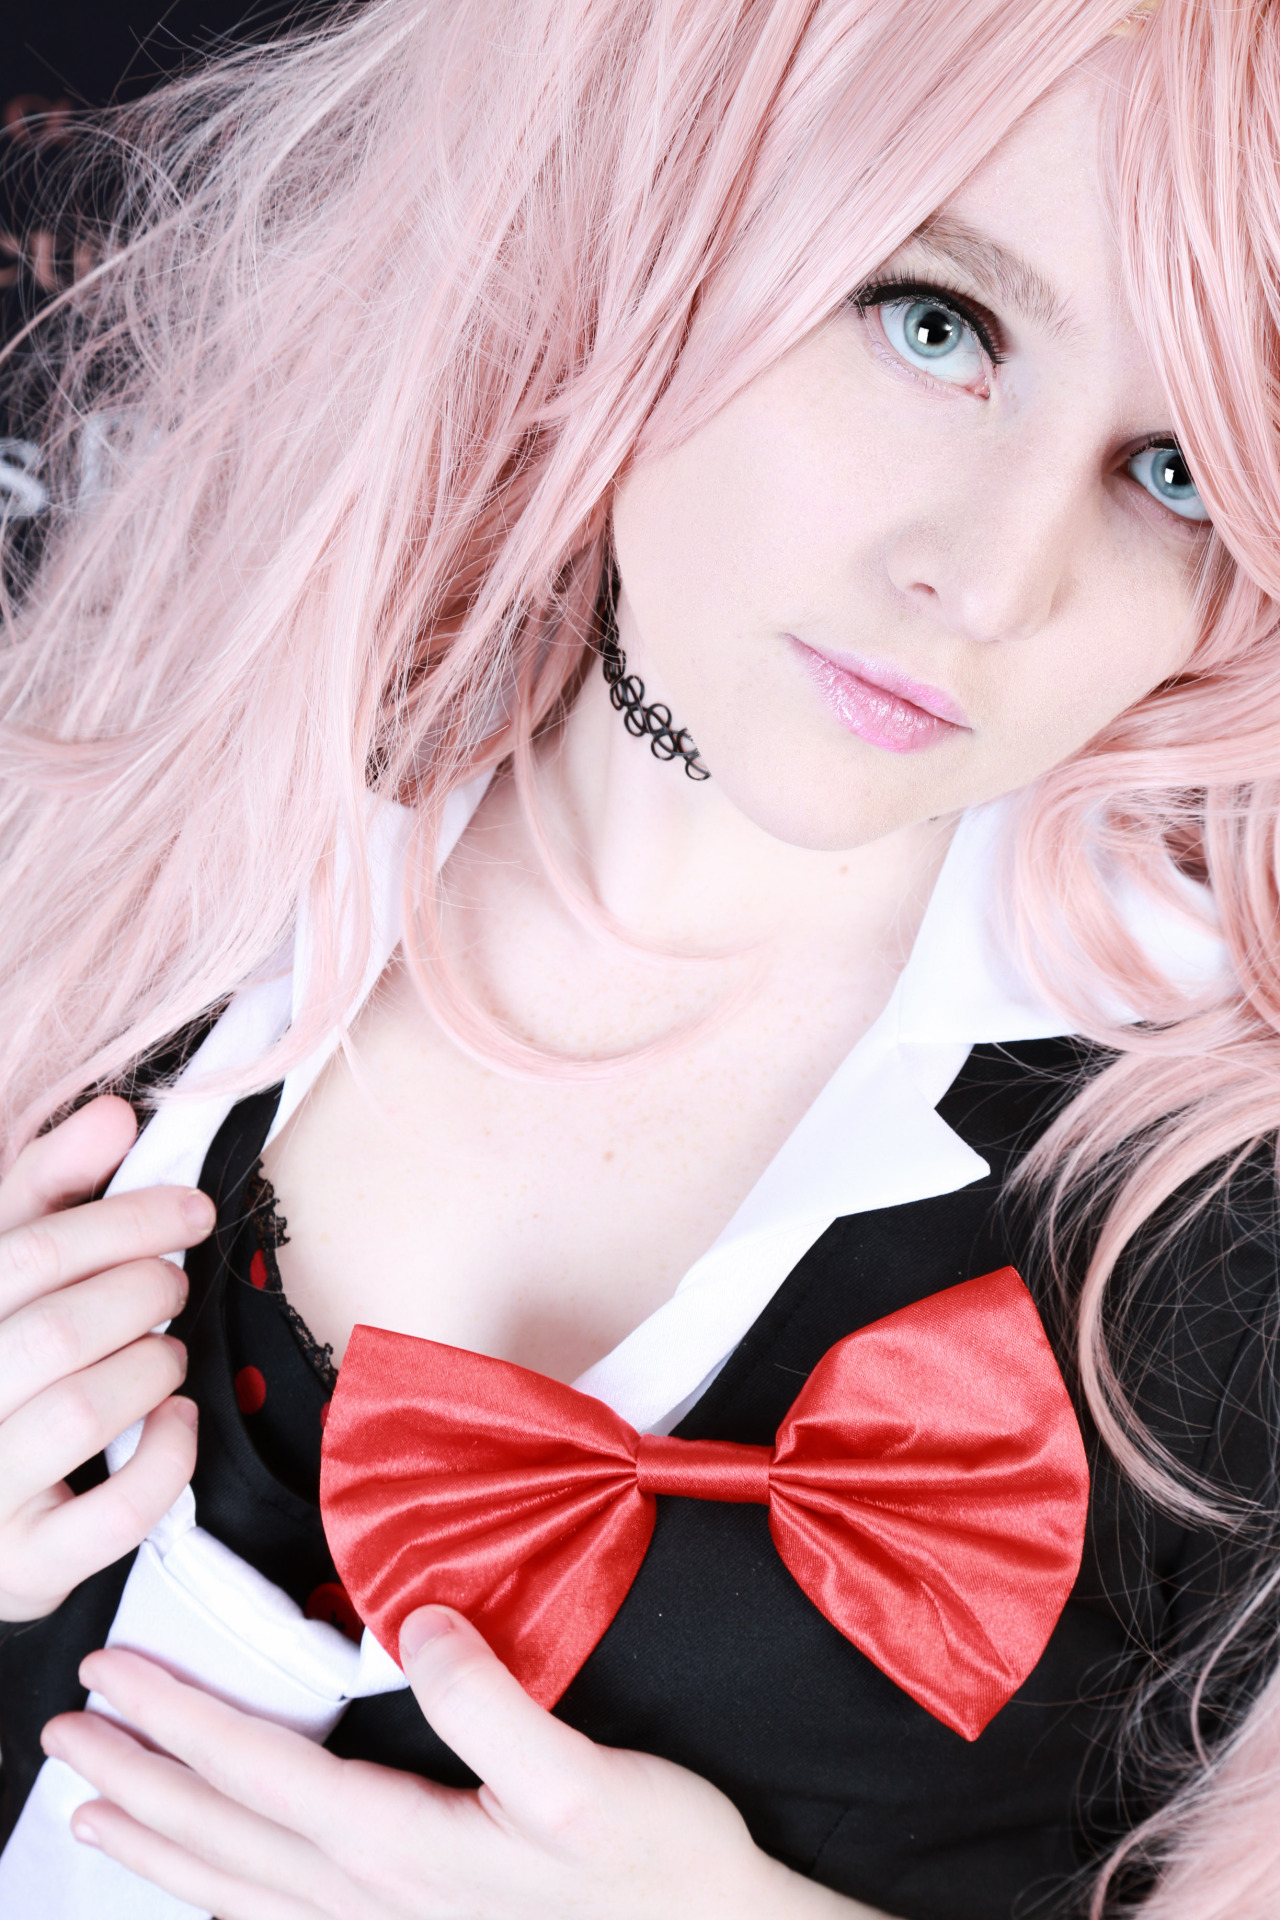 foxy-cosplay:Little preview of a set in the editing process!Junko from Dangan Ronpa,I